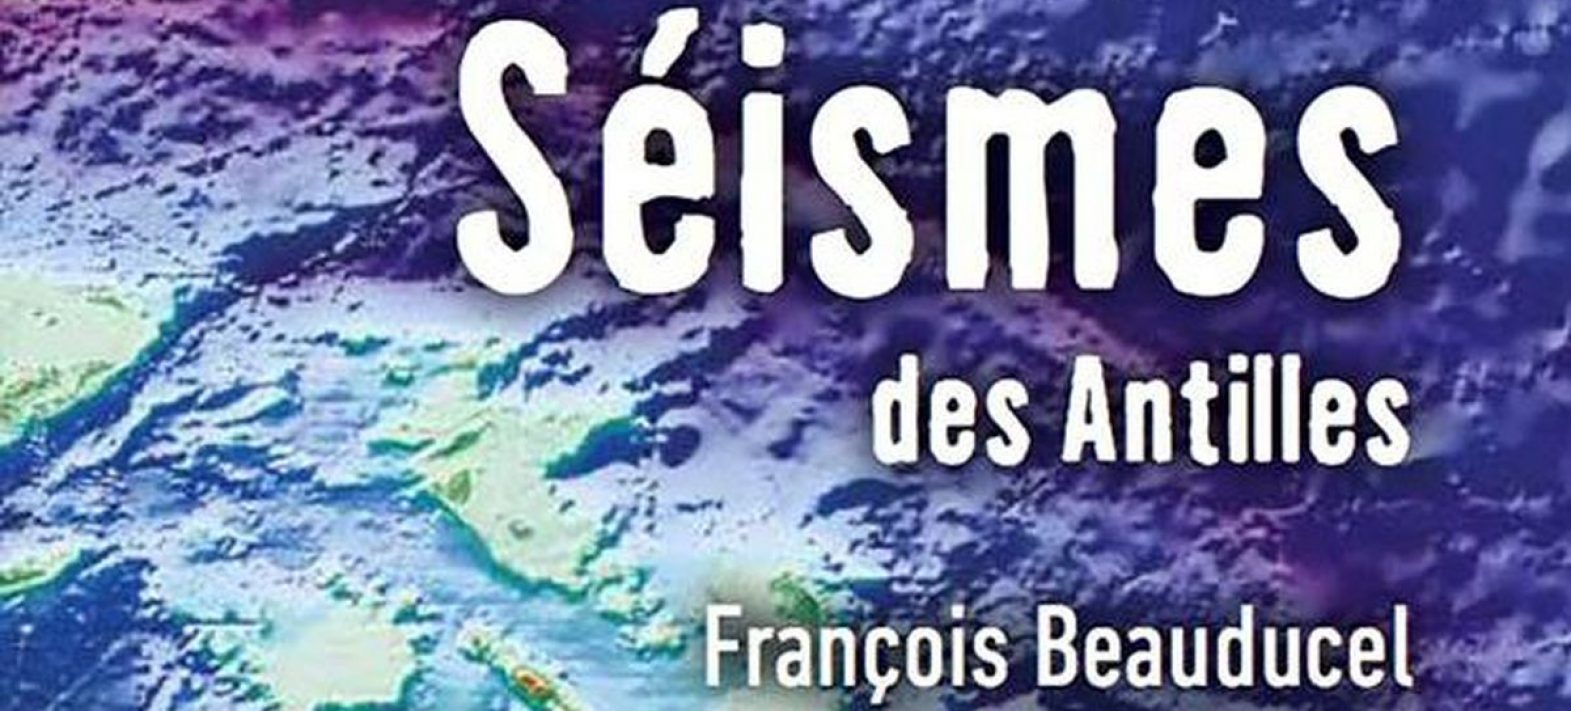 Publication of the book “Les séismes des Antilles” (Earthquakes in the French West Indies)